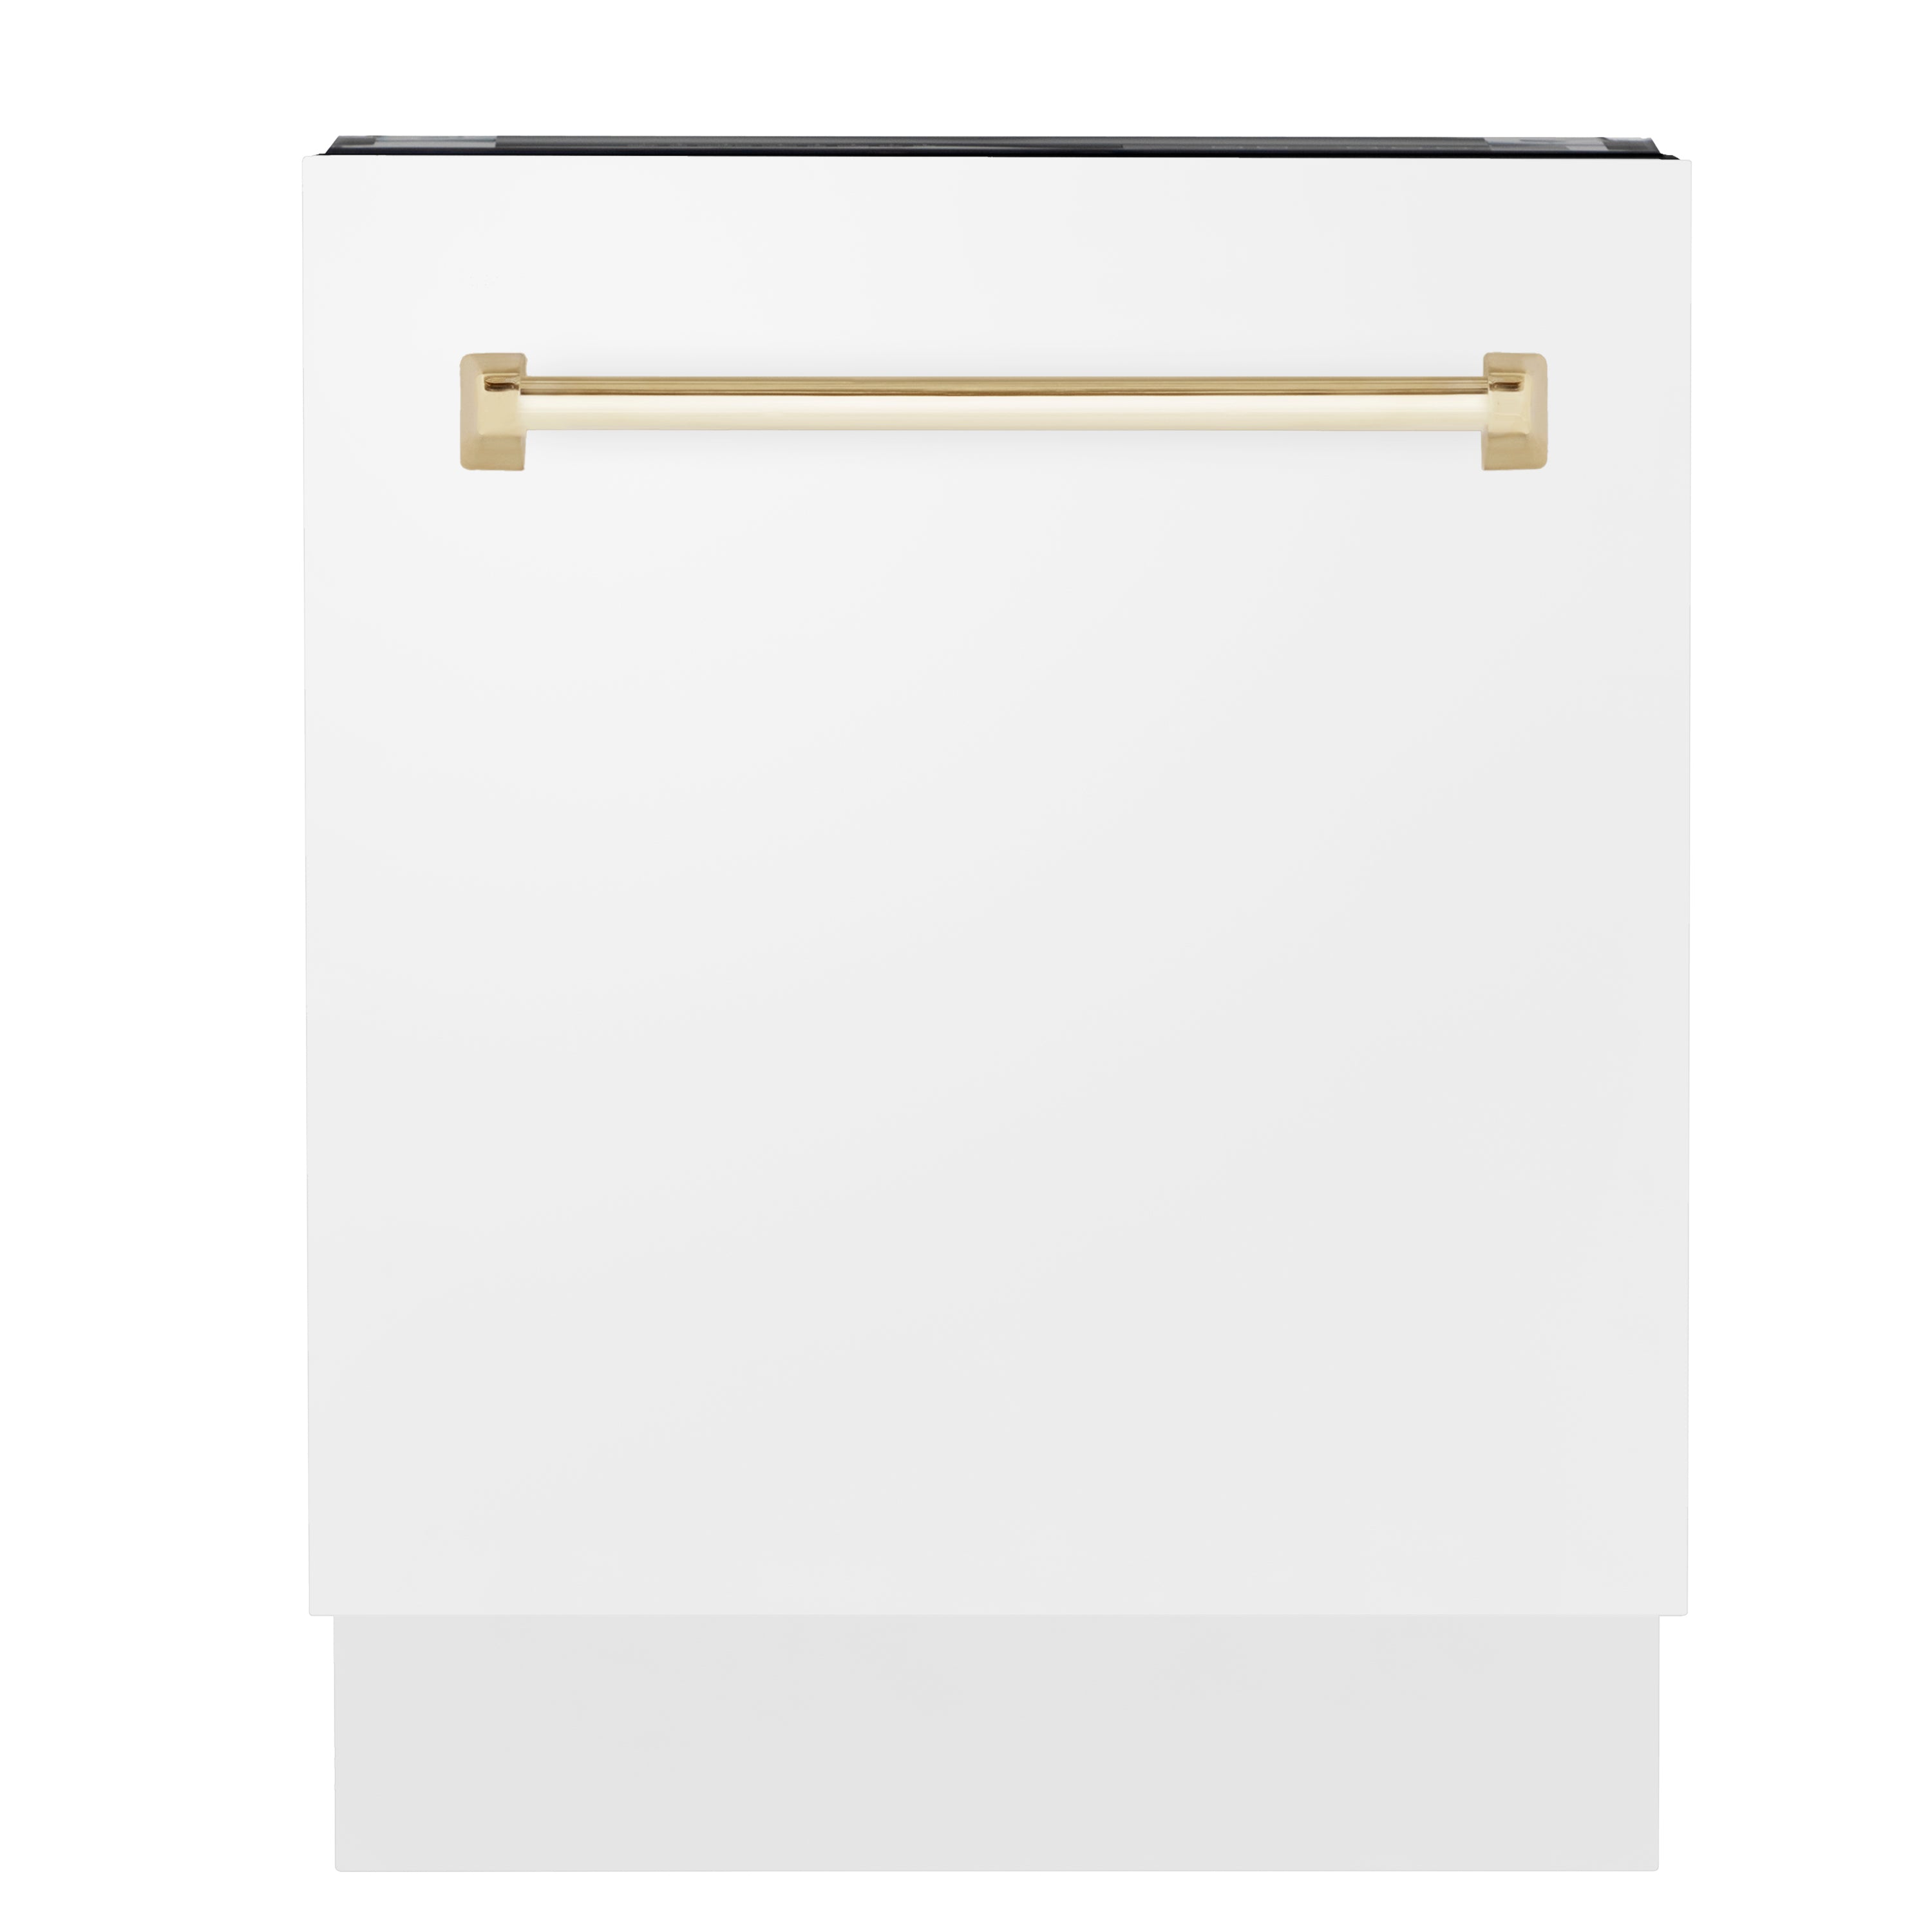 ZLINE Autograph Edition 24" 3rd Rack Top Control Tall Tub Dishwasher in White Matte with Gold Handle, 51dBa (DWVZ-WM-24-G)